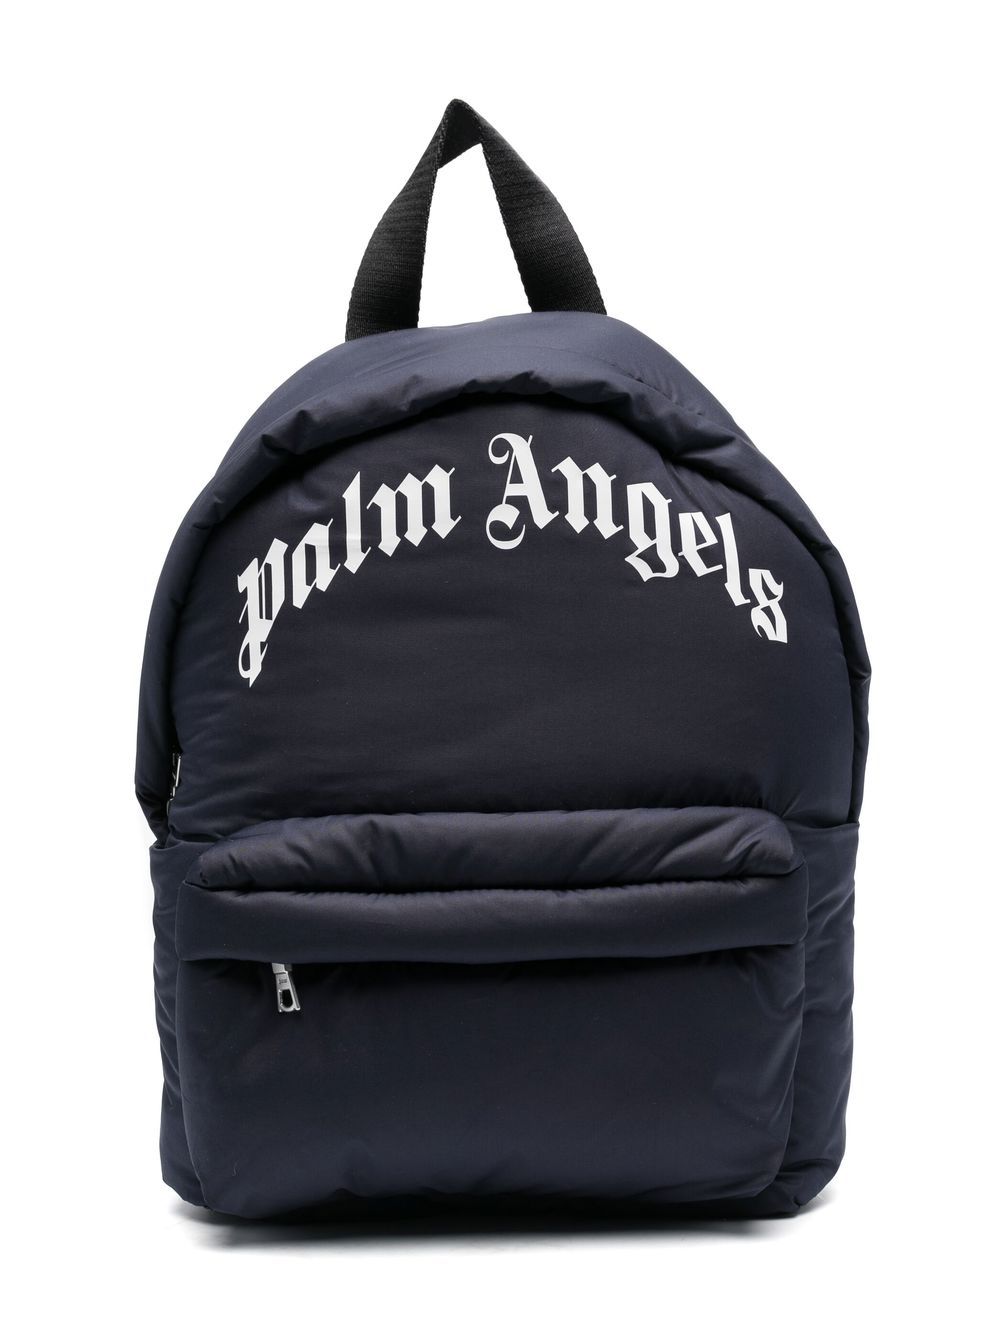 CURVED LOGO LITTLE BACKPACK NAVY BLUE WH